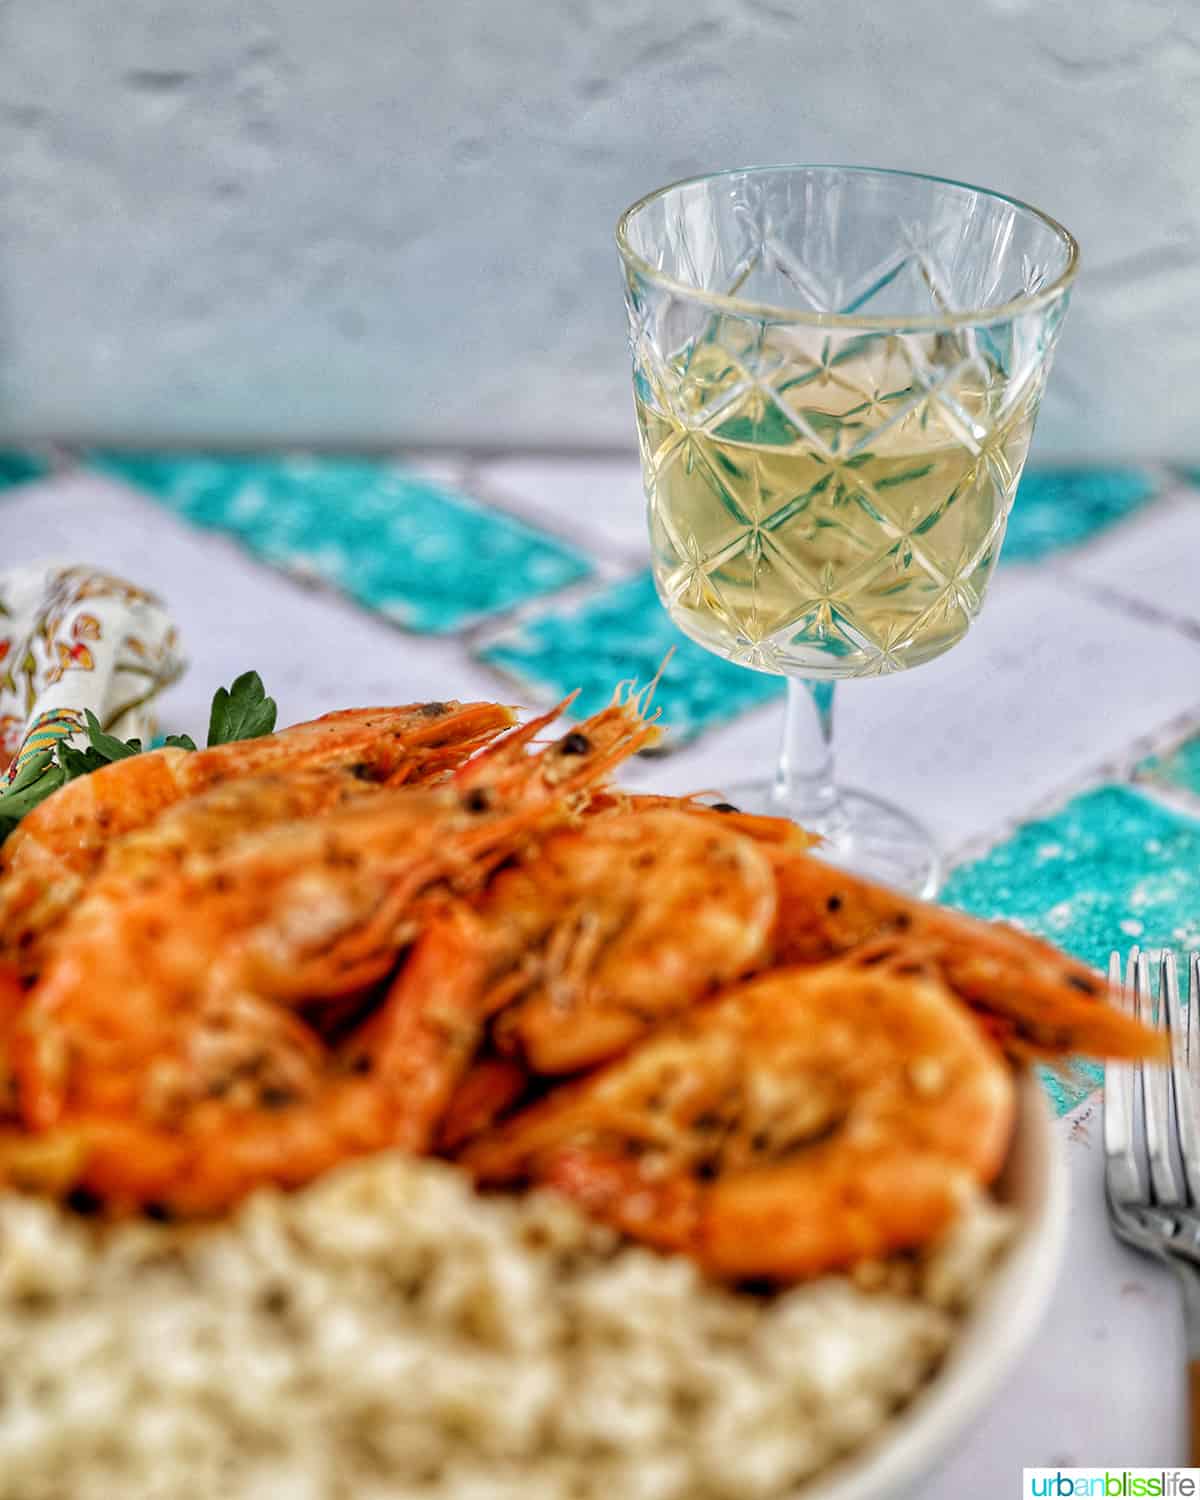 shrimp adobo over rice with a glass of white wine